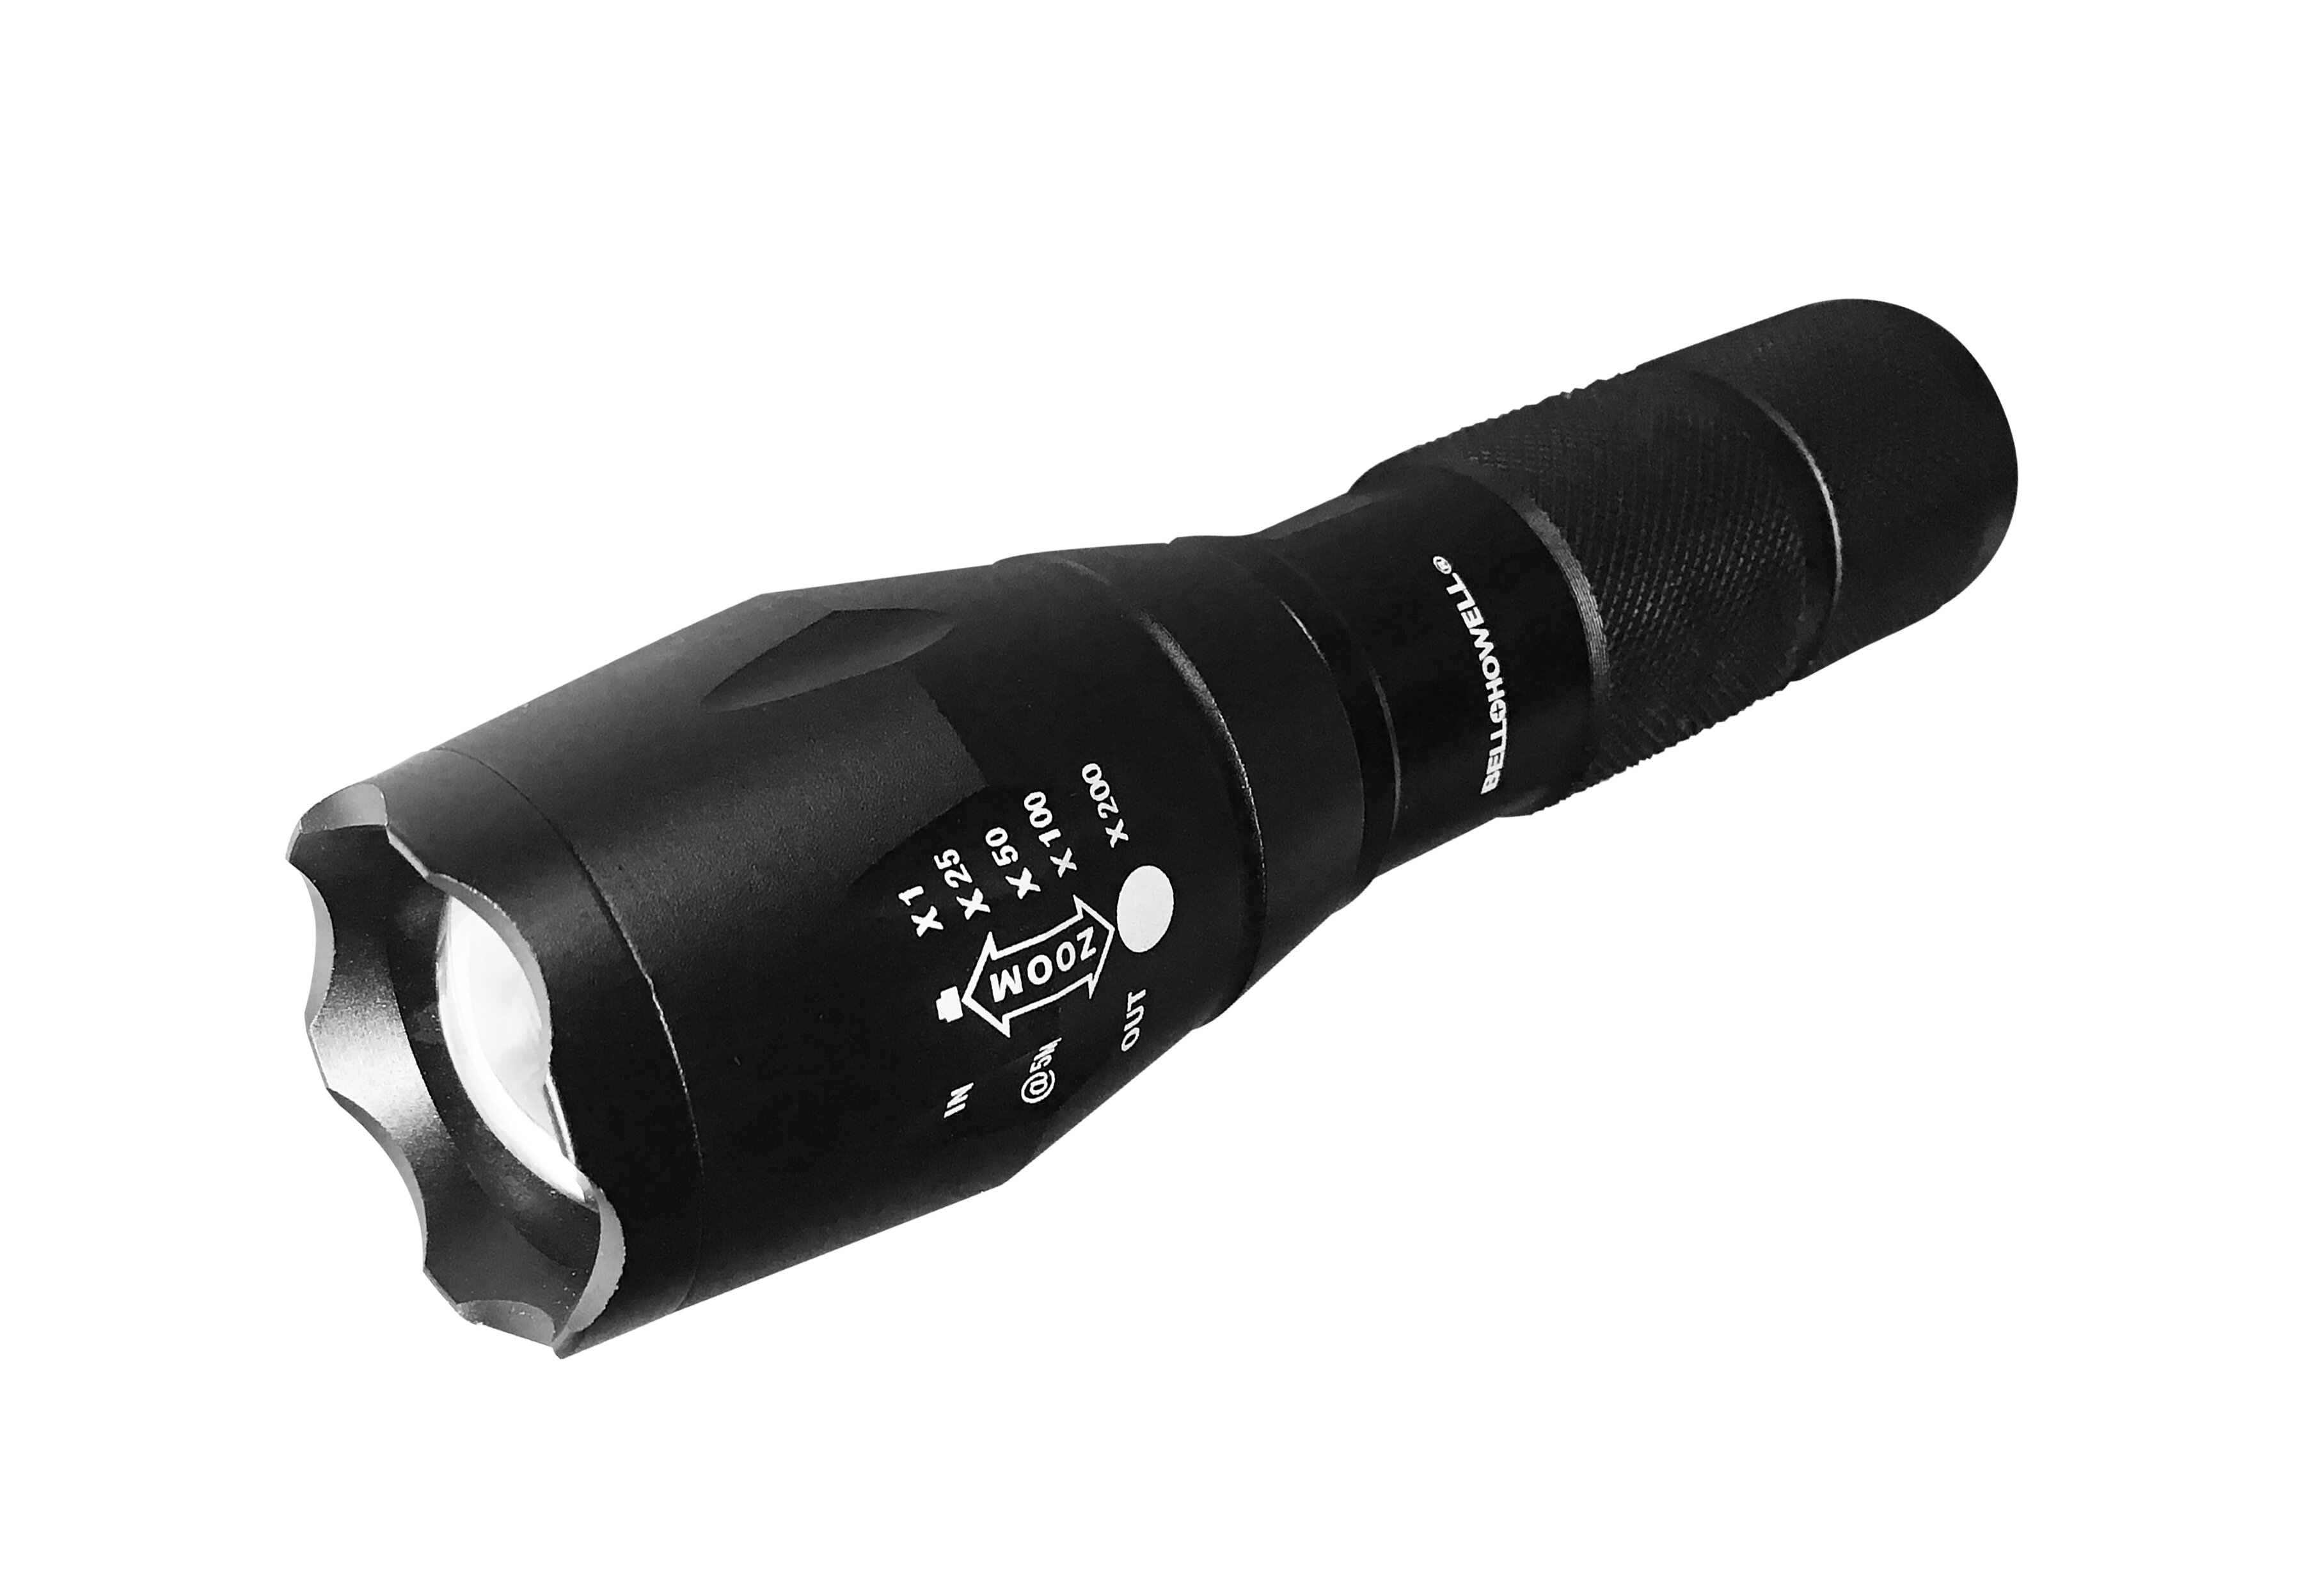 Bell + Howell Taclight High-Powered Magnetic Base Tactical Flashlight